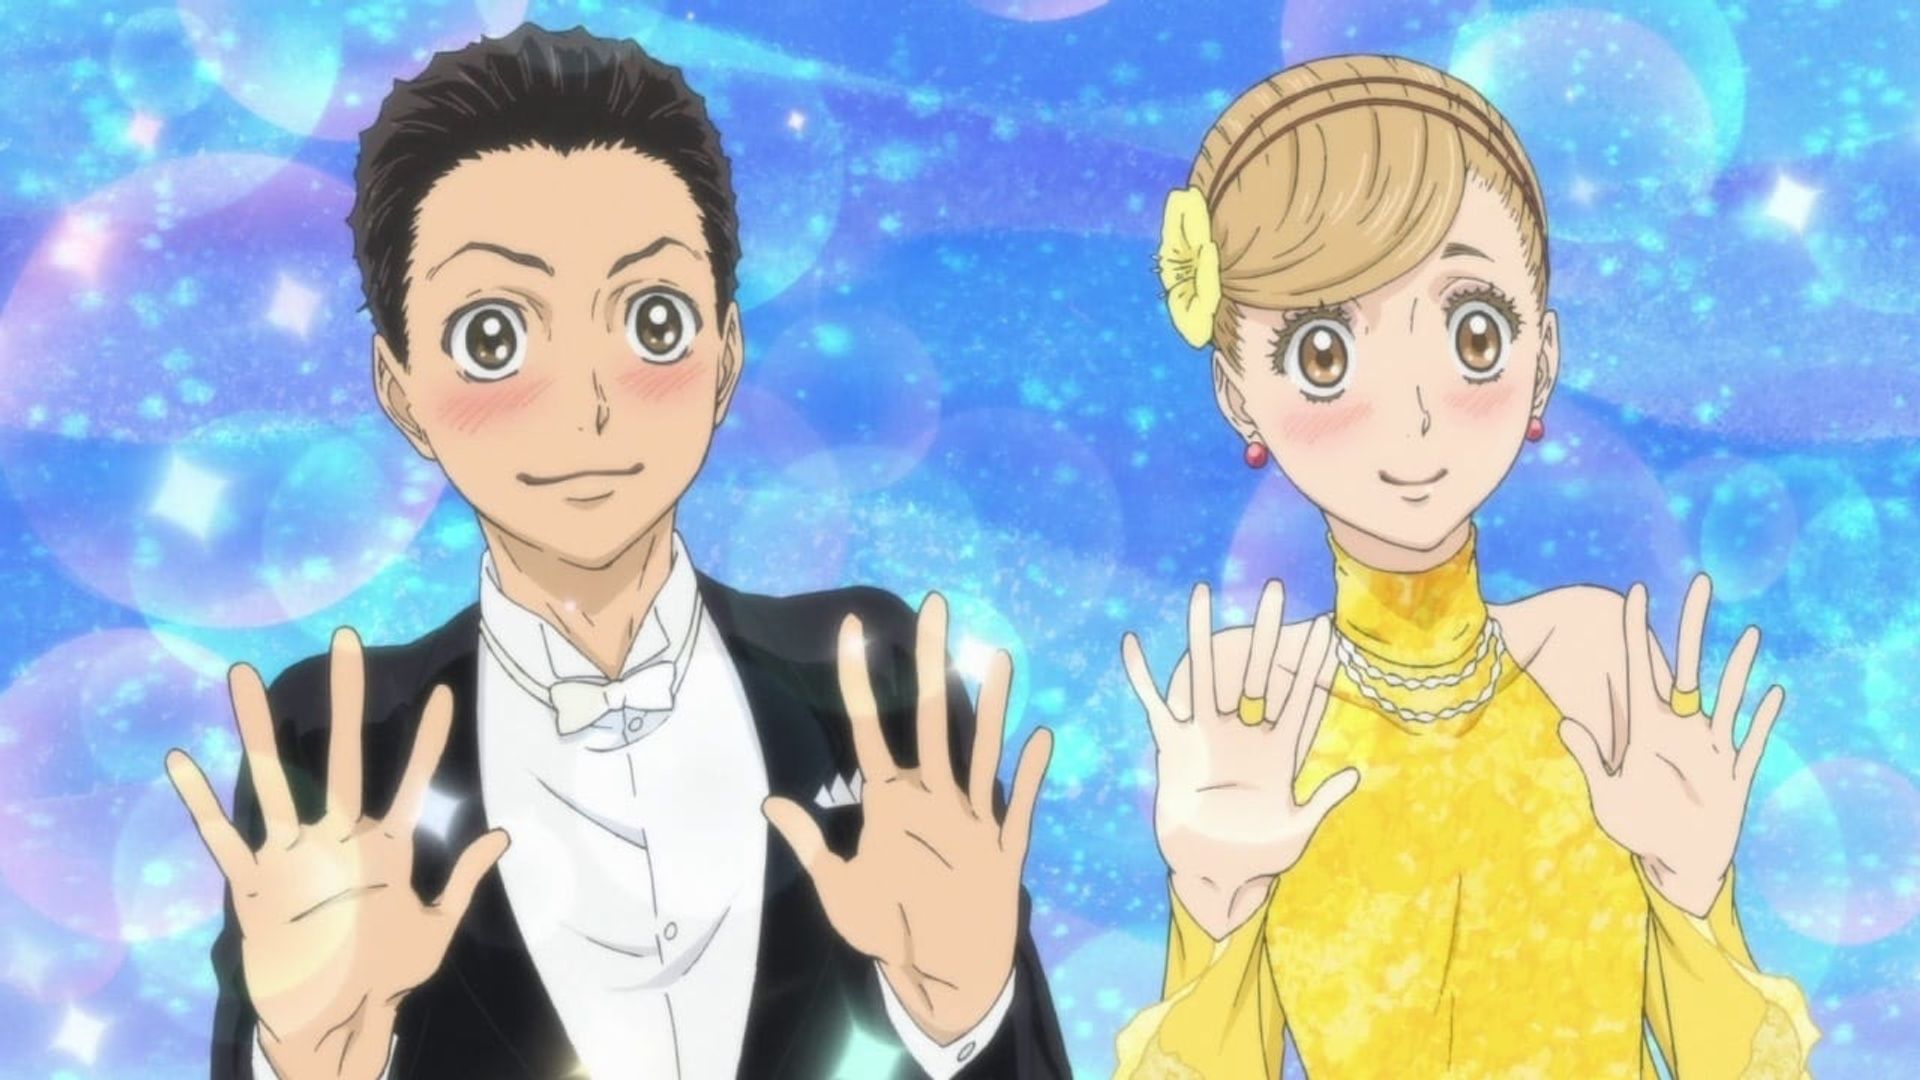 Welcome to the Ballroom background